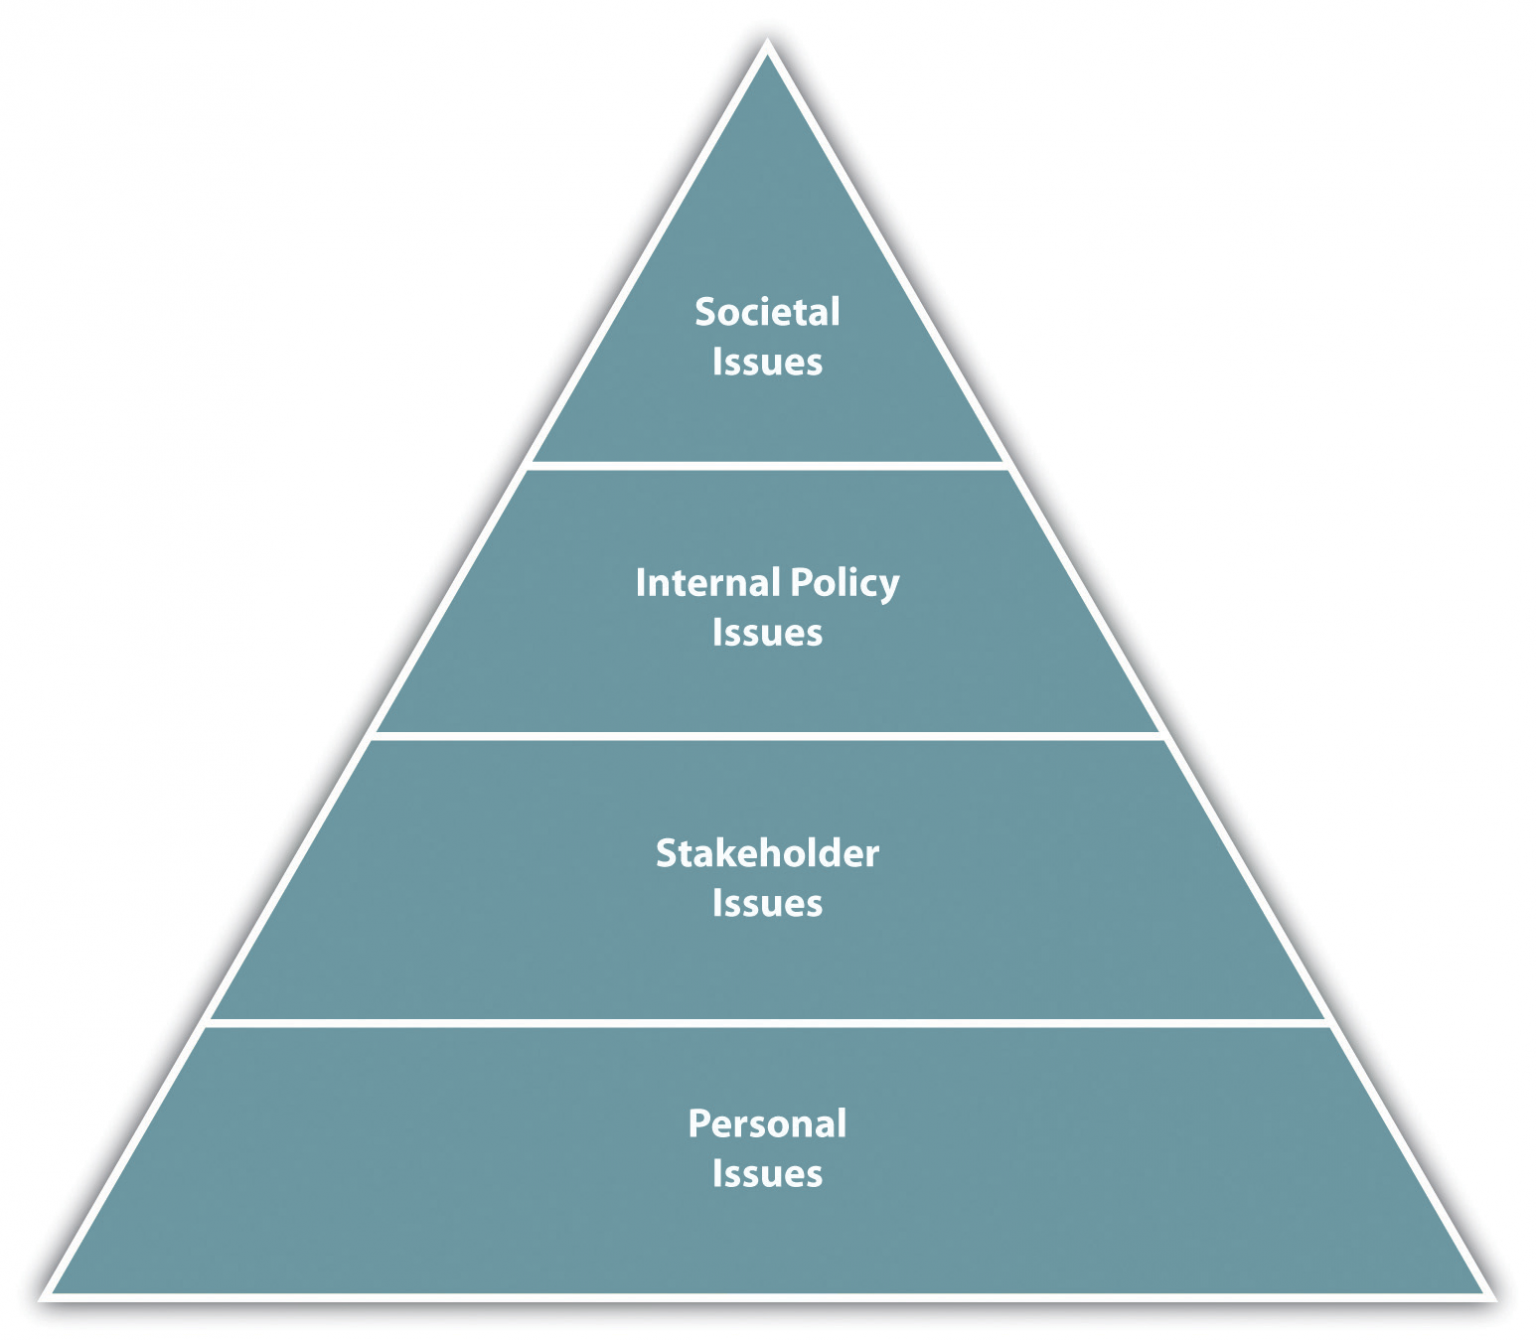 Internal policy. Creating shared value доклад. Social values. Responsibility Levels. Three Levels of communication.